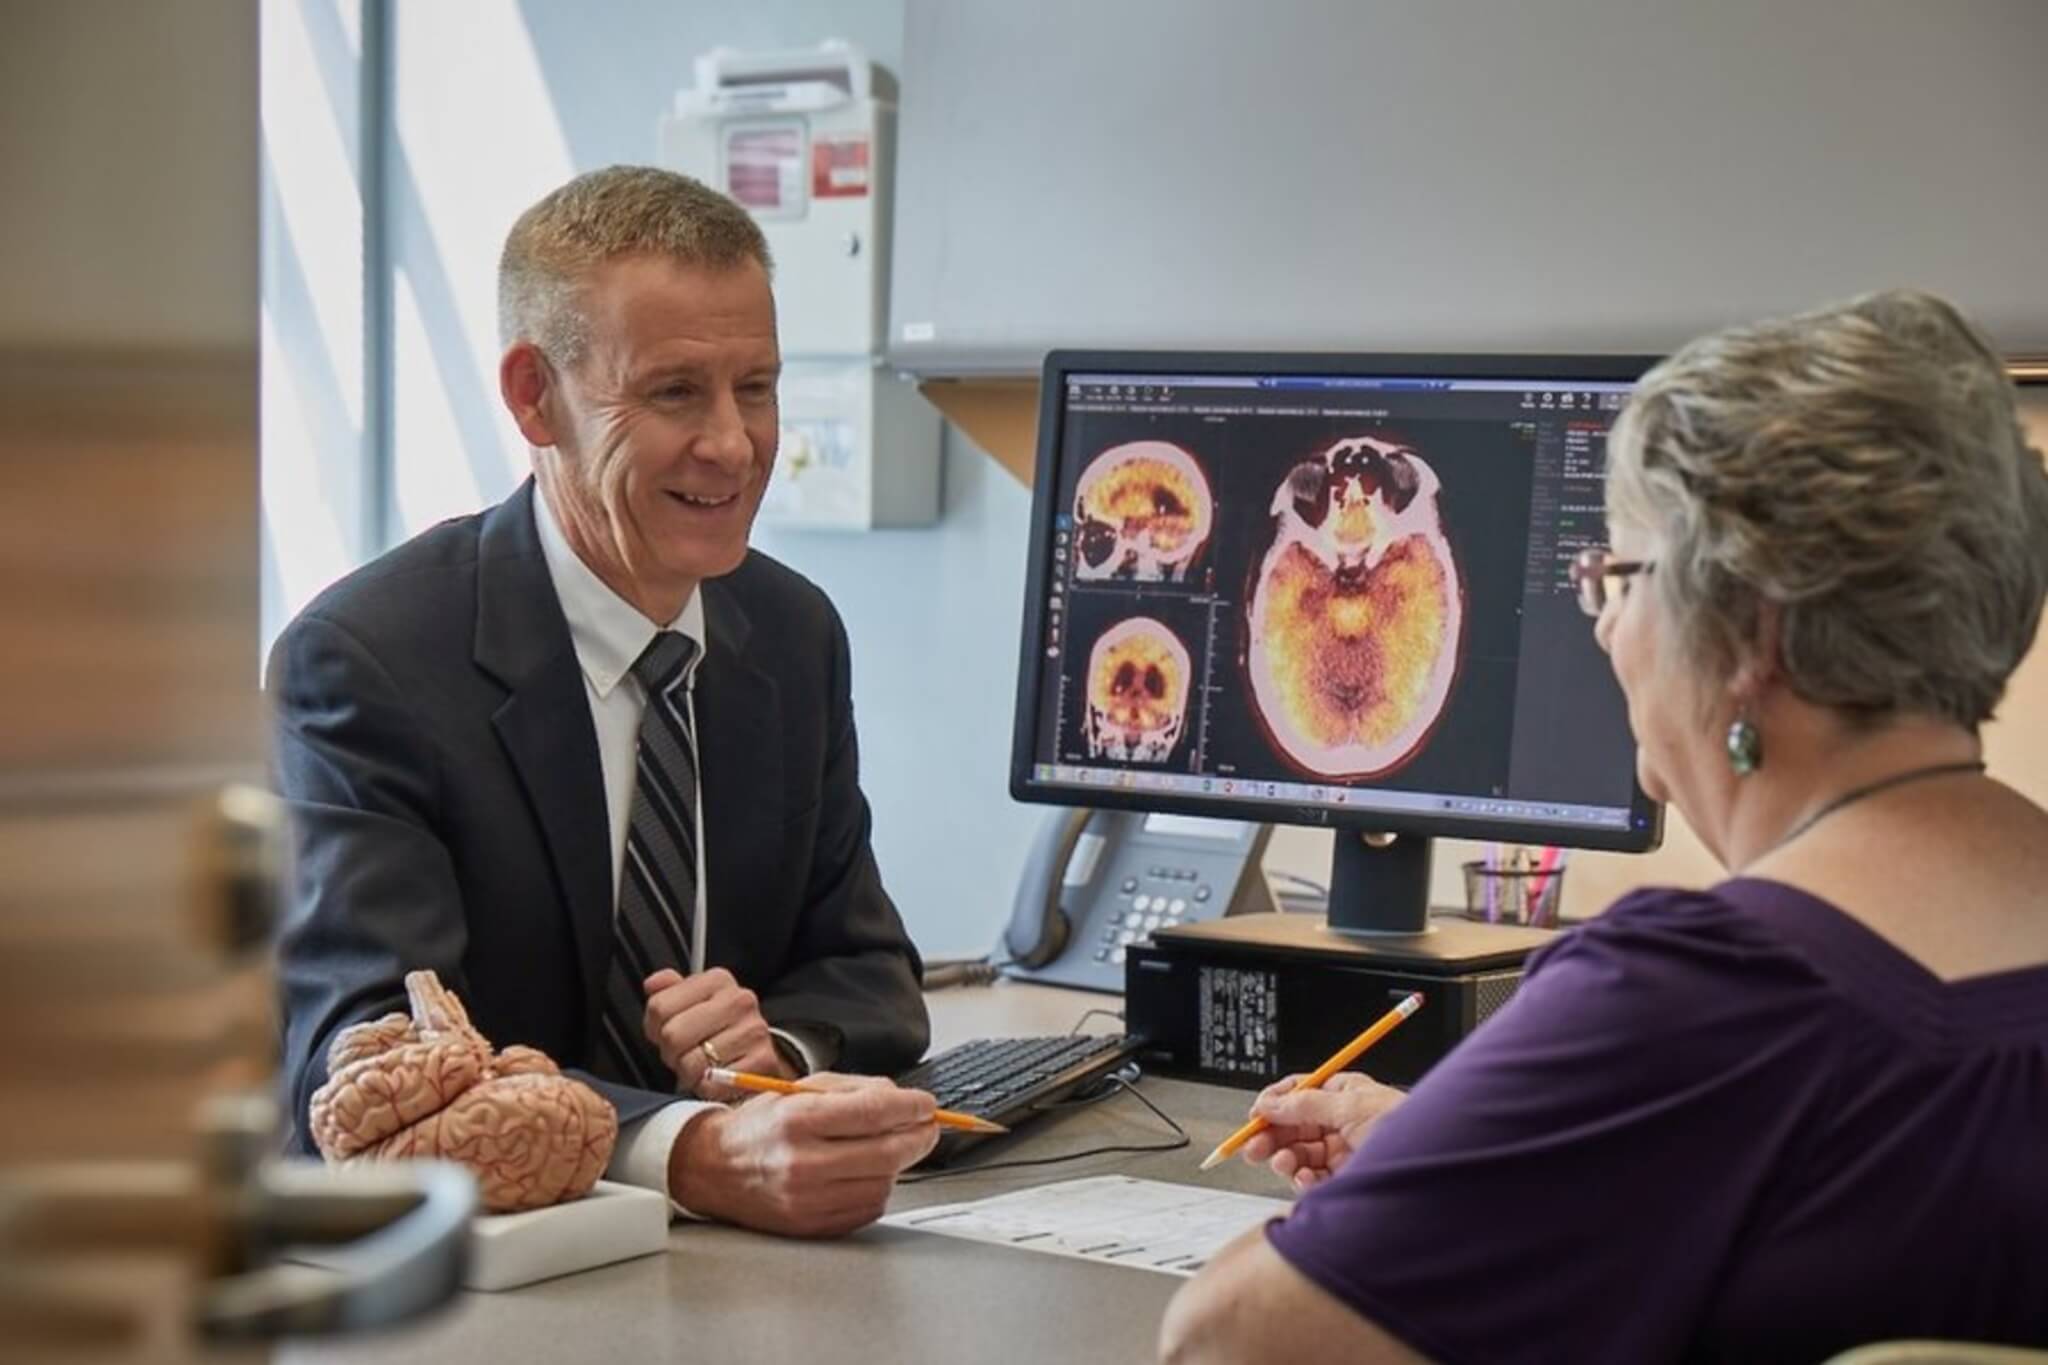 Paul E. Schulz, MD, the Rick McCord Professor in Neurology with McGovern Medical School at UTHealth Houston, was senior author of a study that found several vaccinations were linked to a reduced risk of Alzheimer's disease